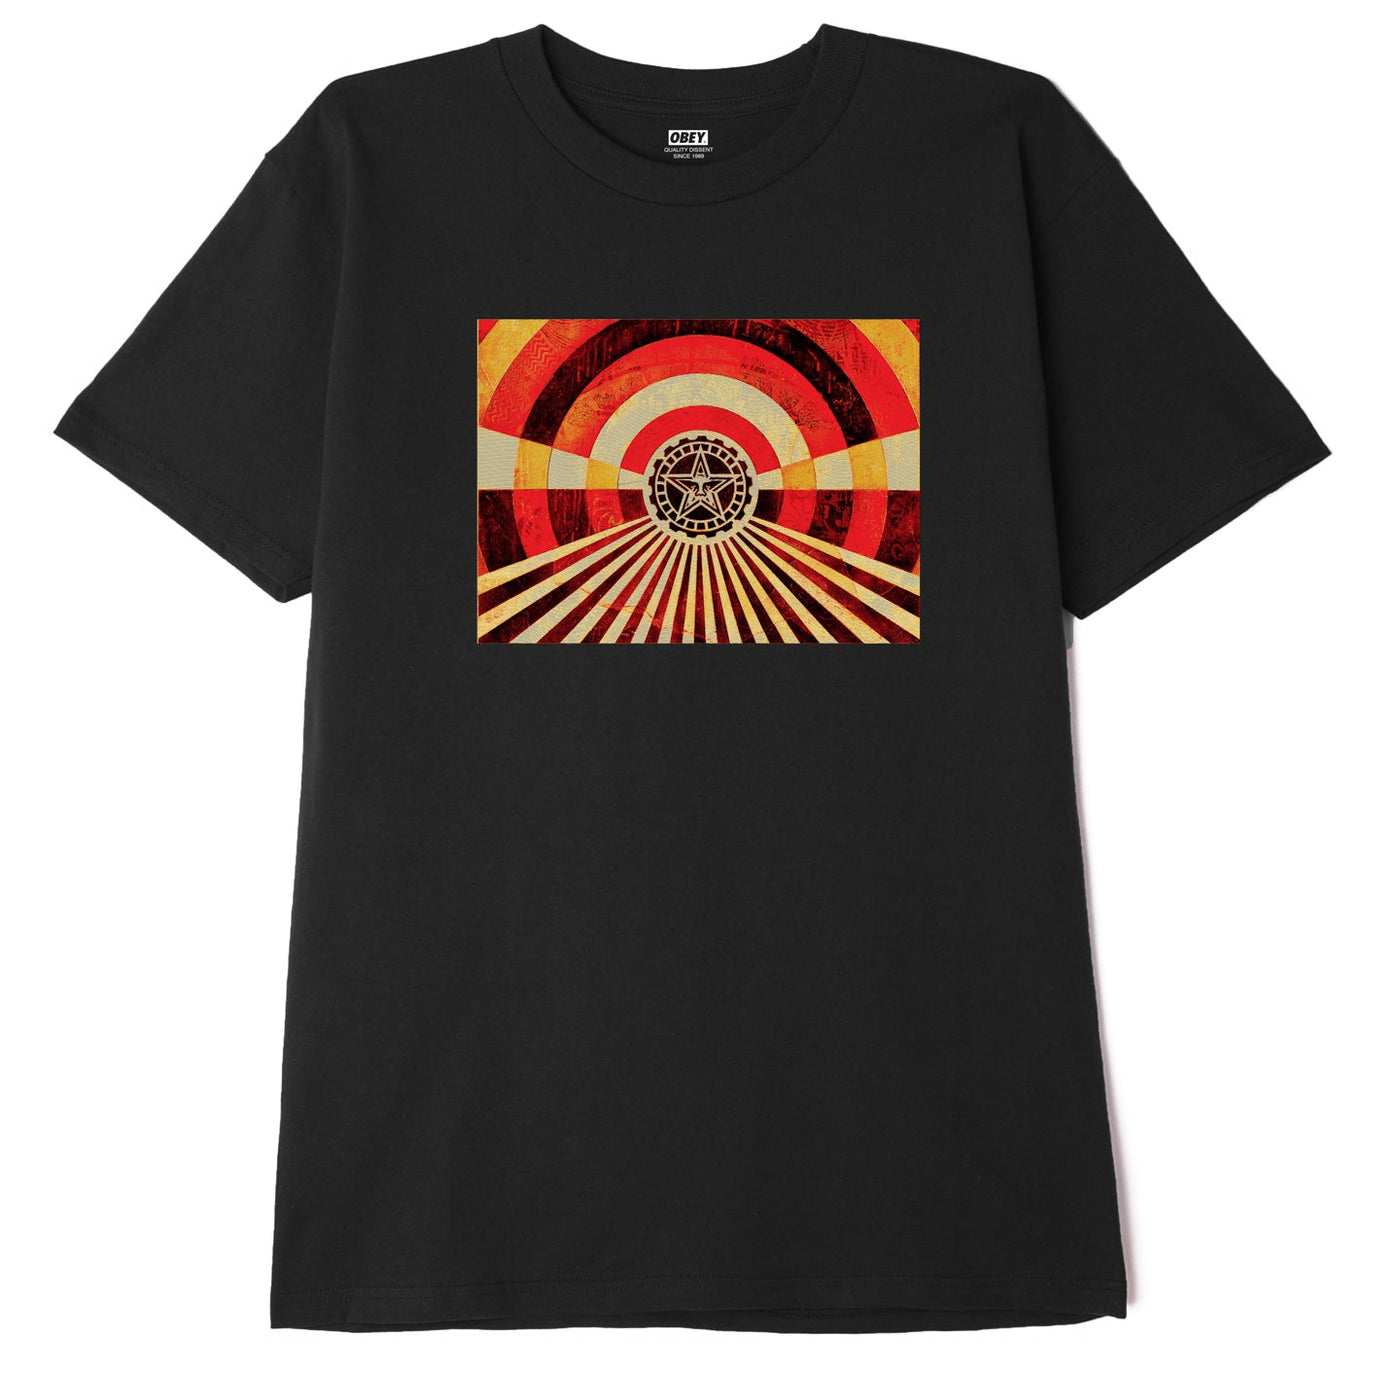 Obey Tunnel Vision Classic T-Shirt Black